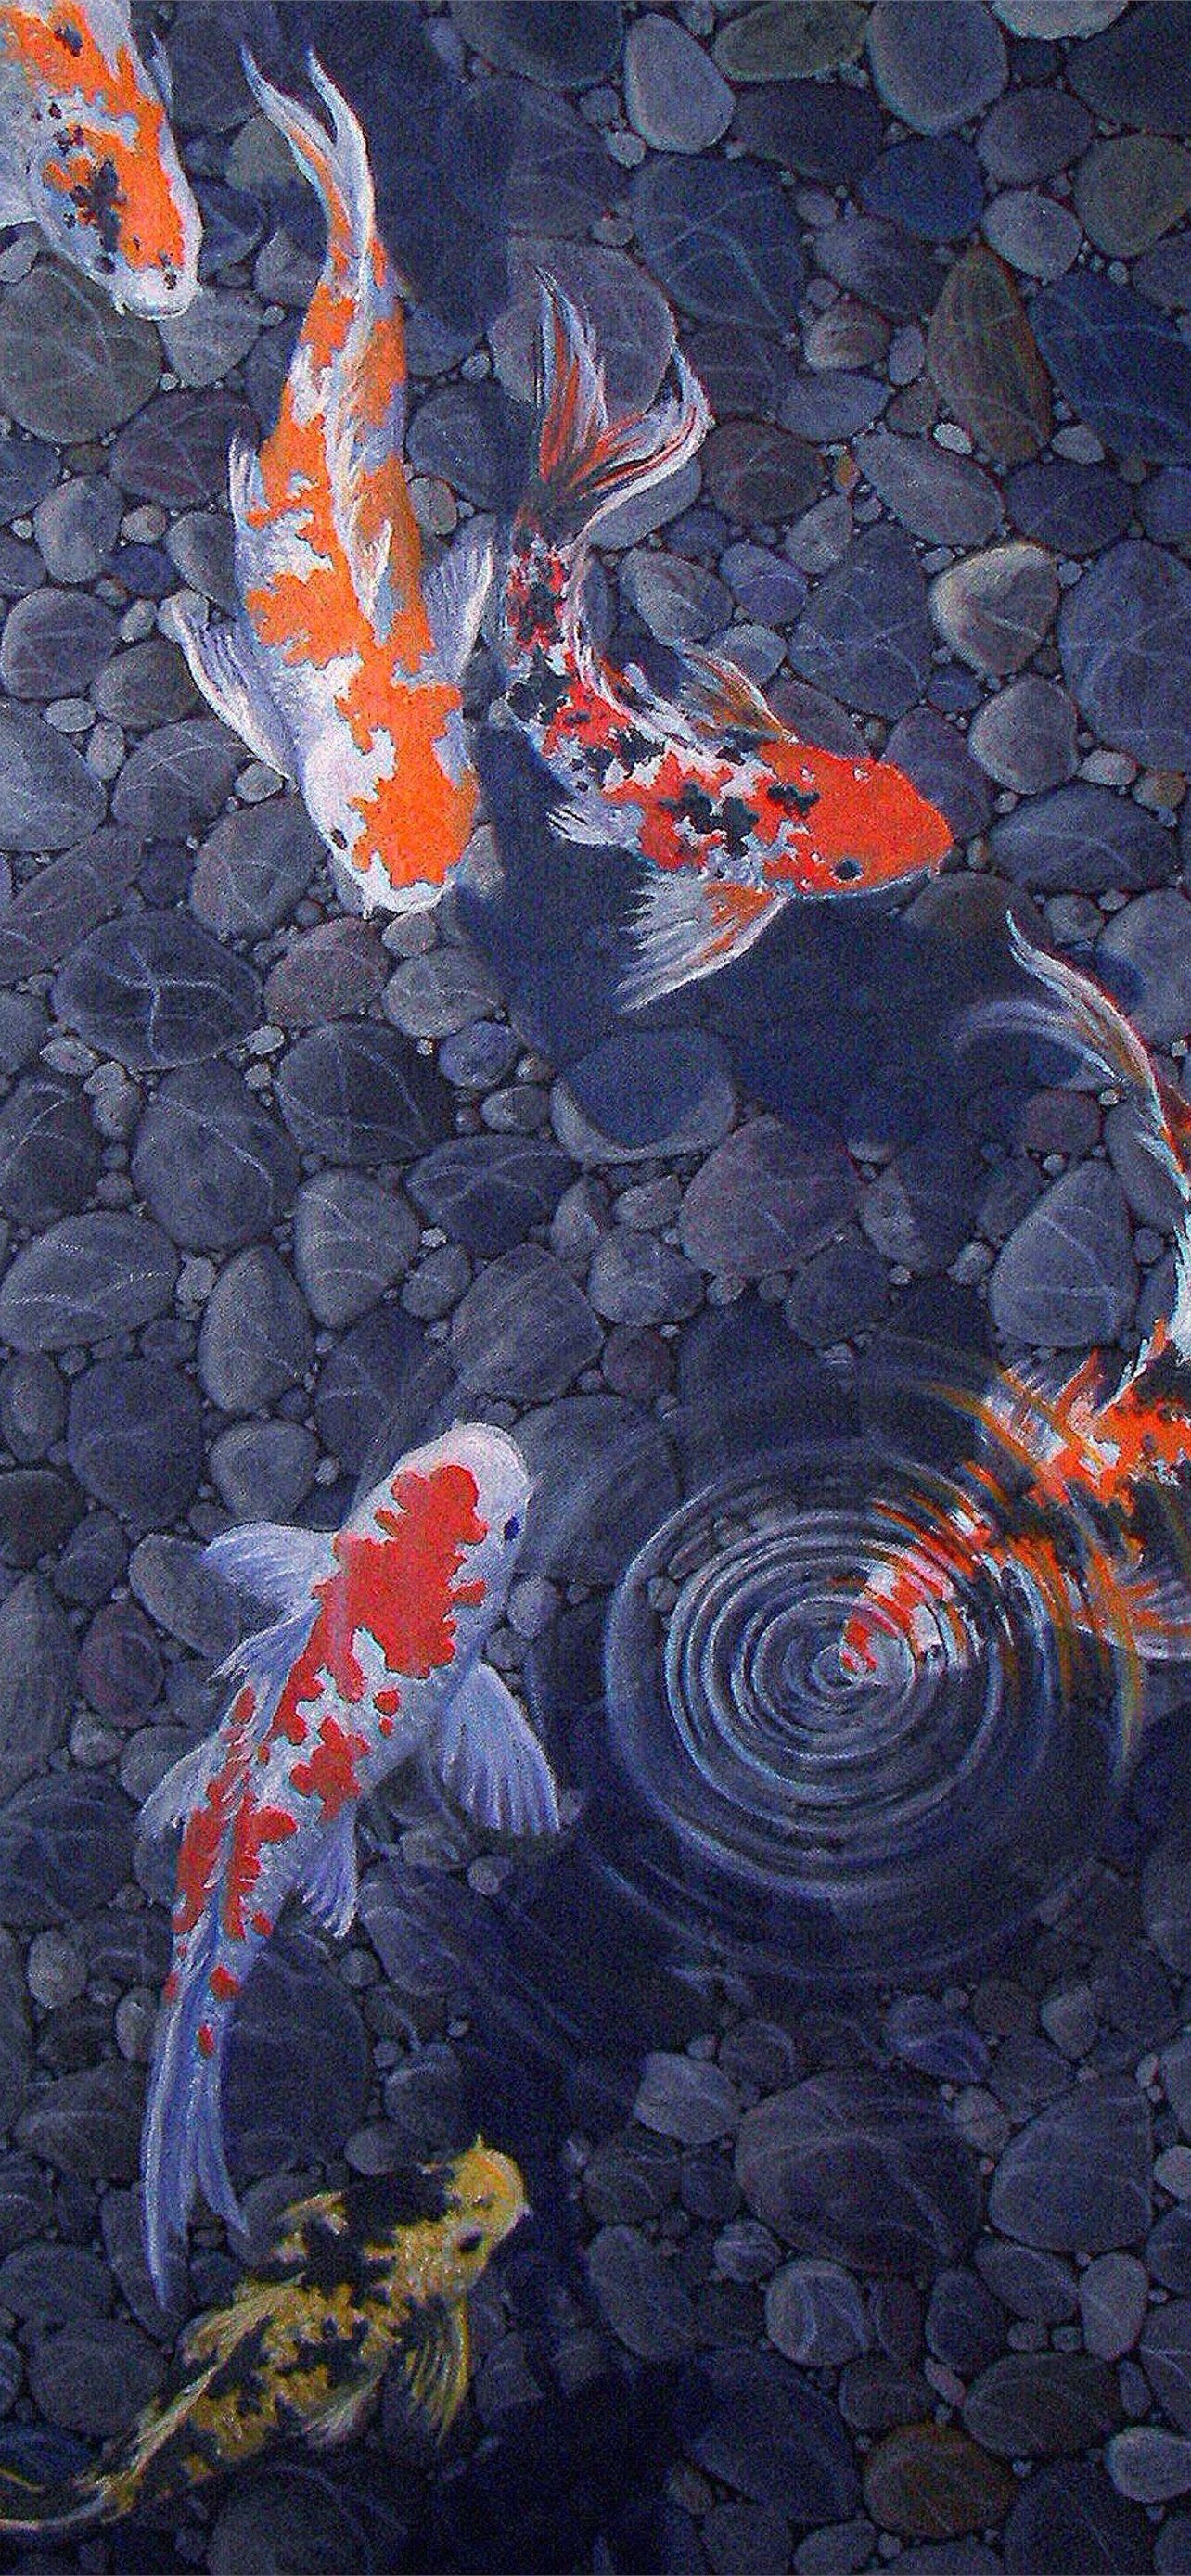 A painting of a group of koi fish swimming in a pond - Koi fish, salmon